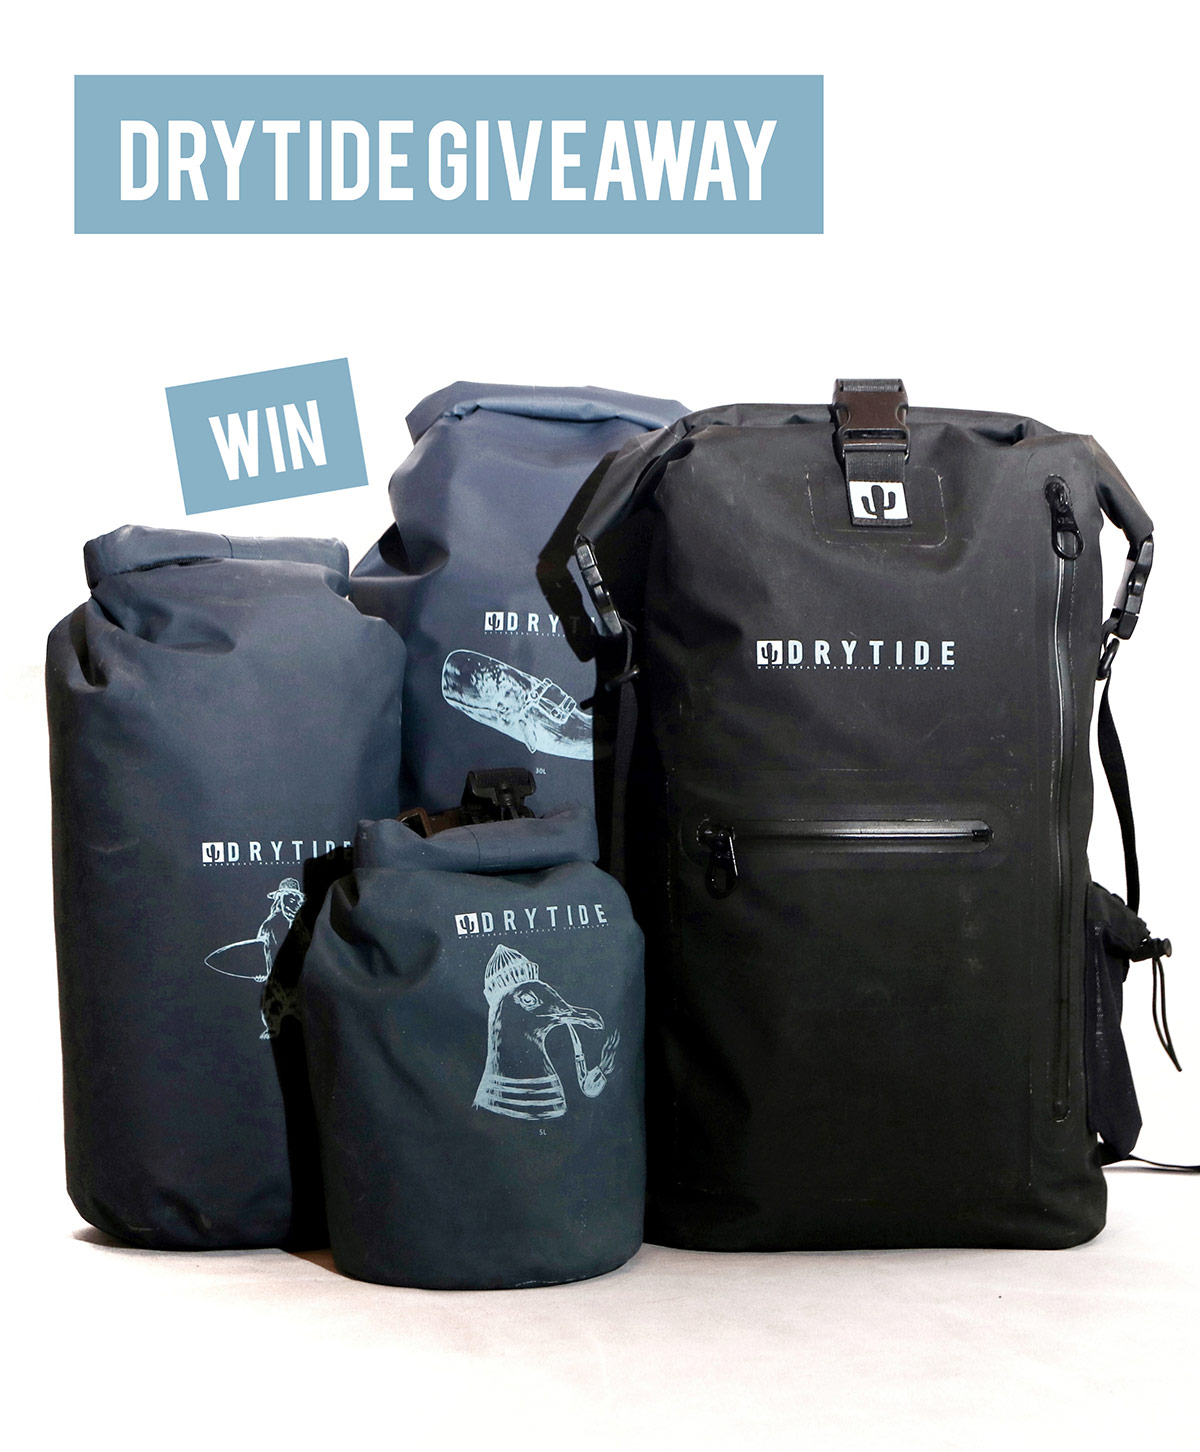 DryTide Giveaway 5